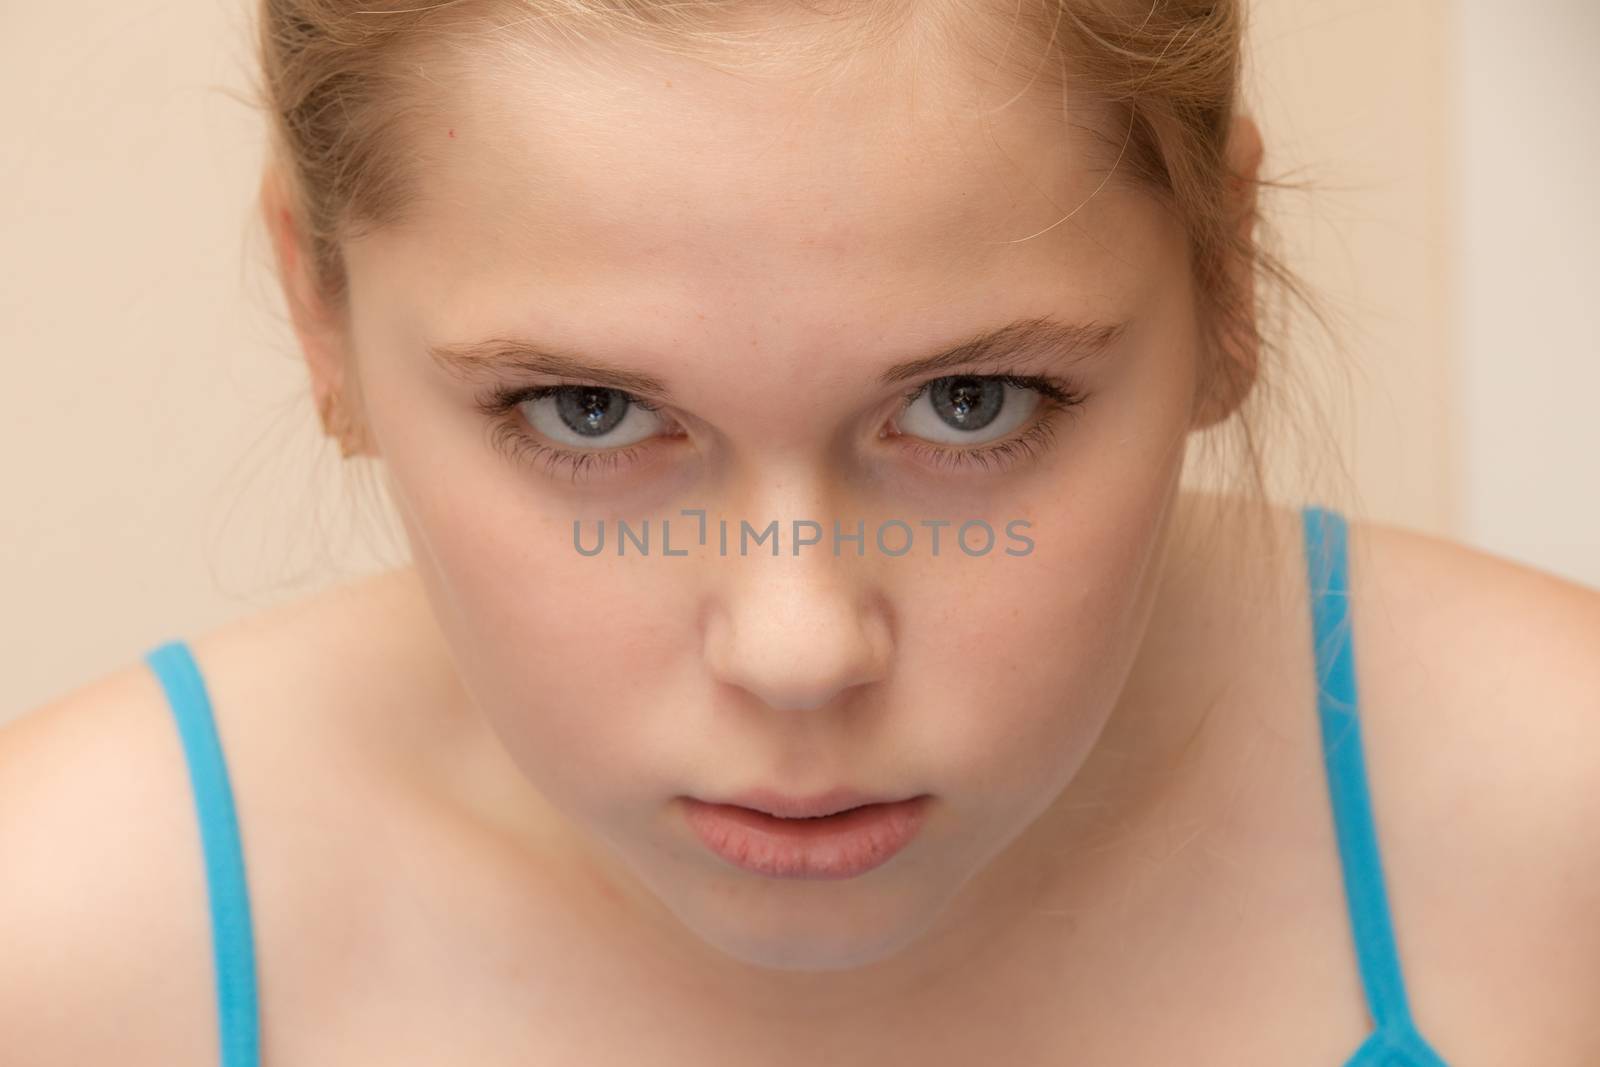 Preteen with an angry look upon her face